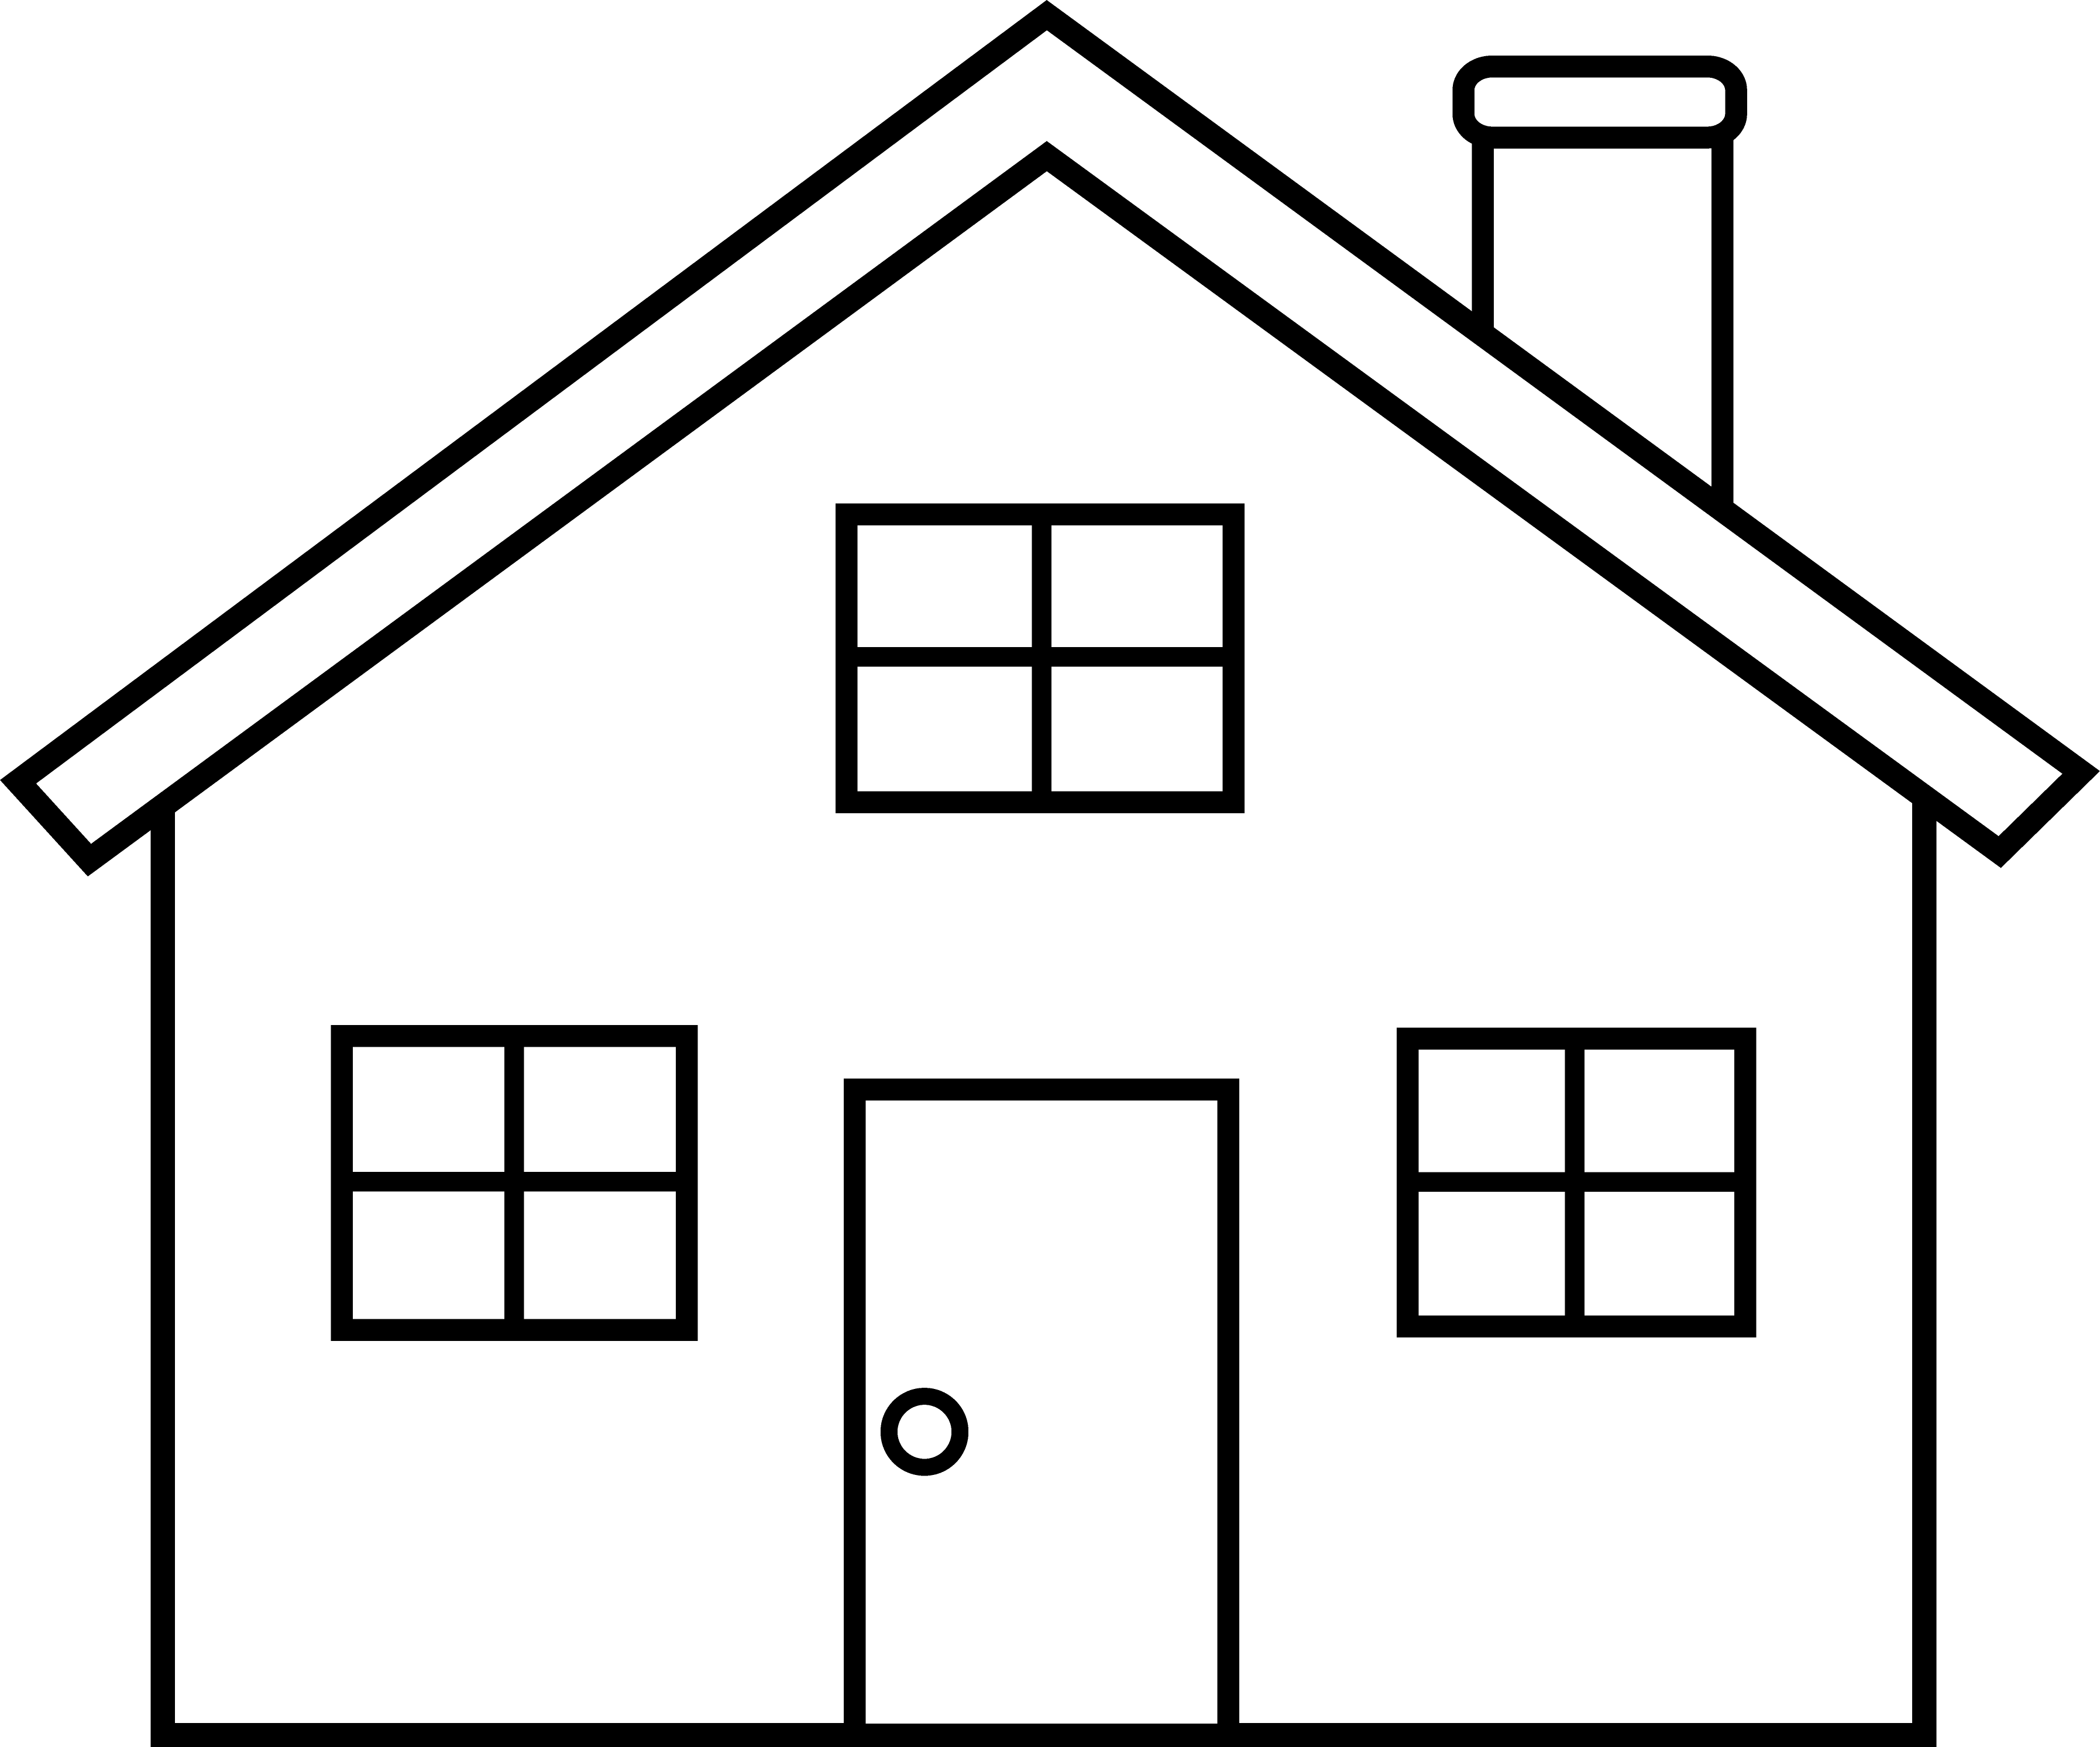 Doghouse clipart clip art. House black and white